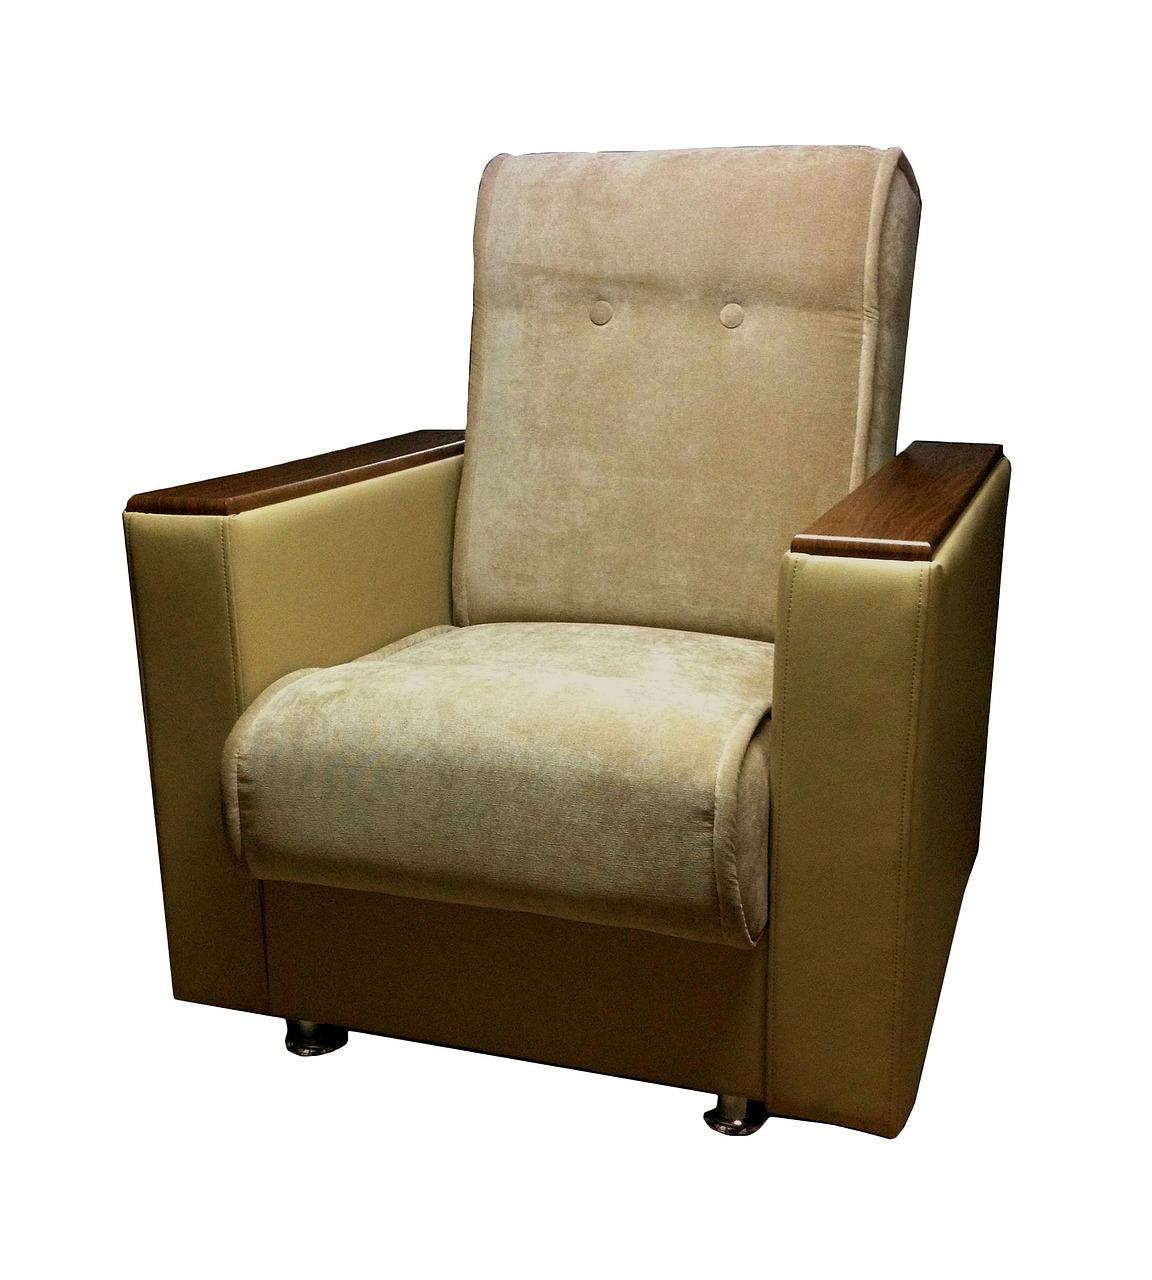 armchair upholstered furniture brown free photo